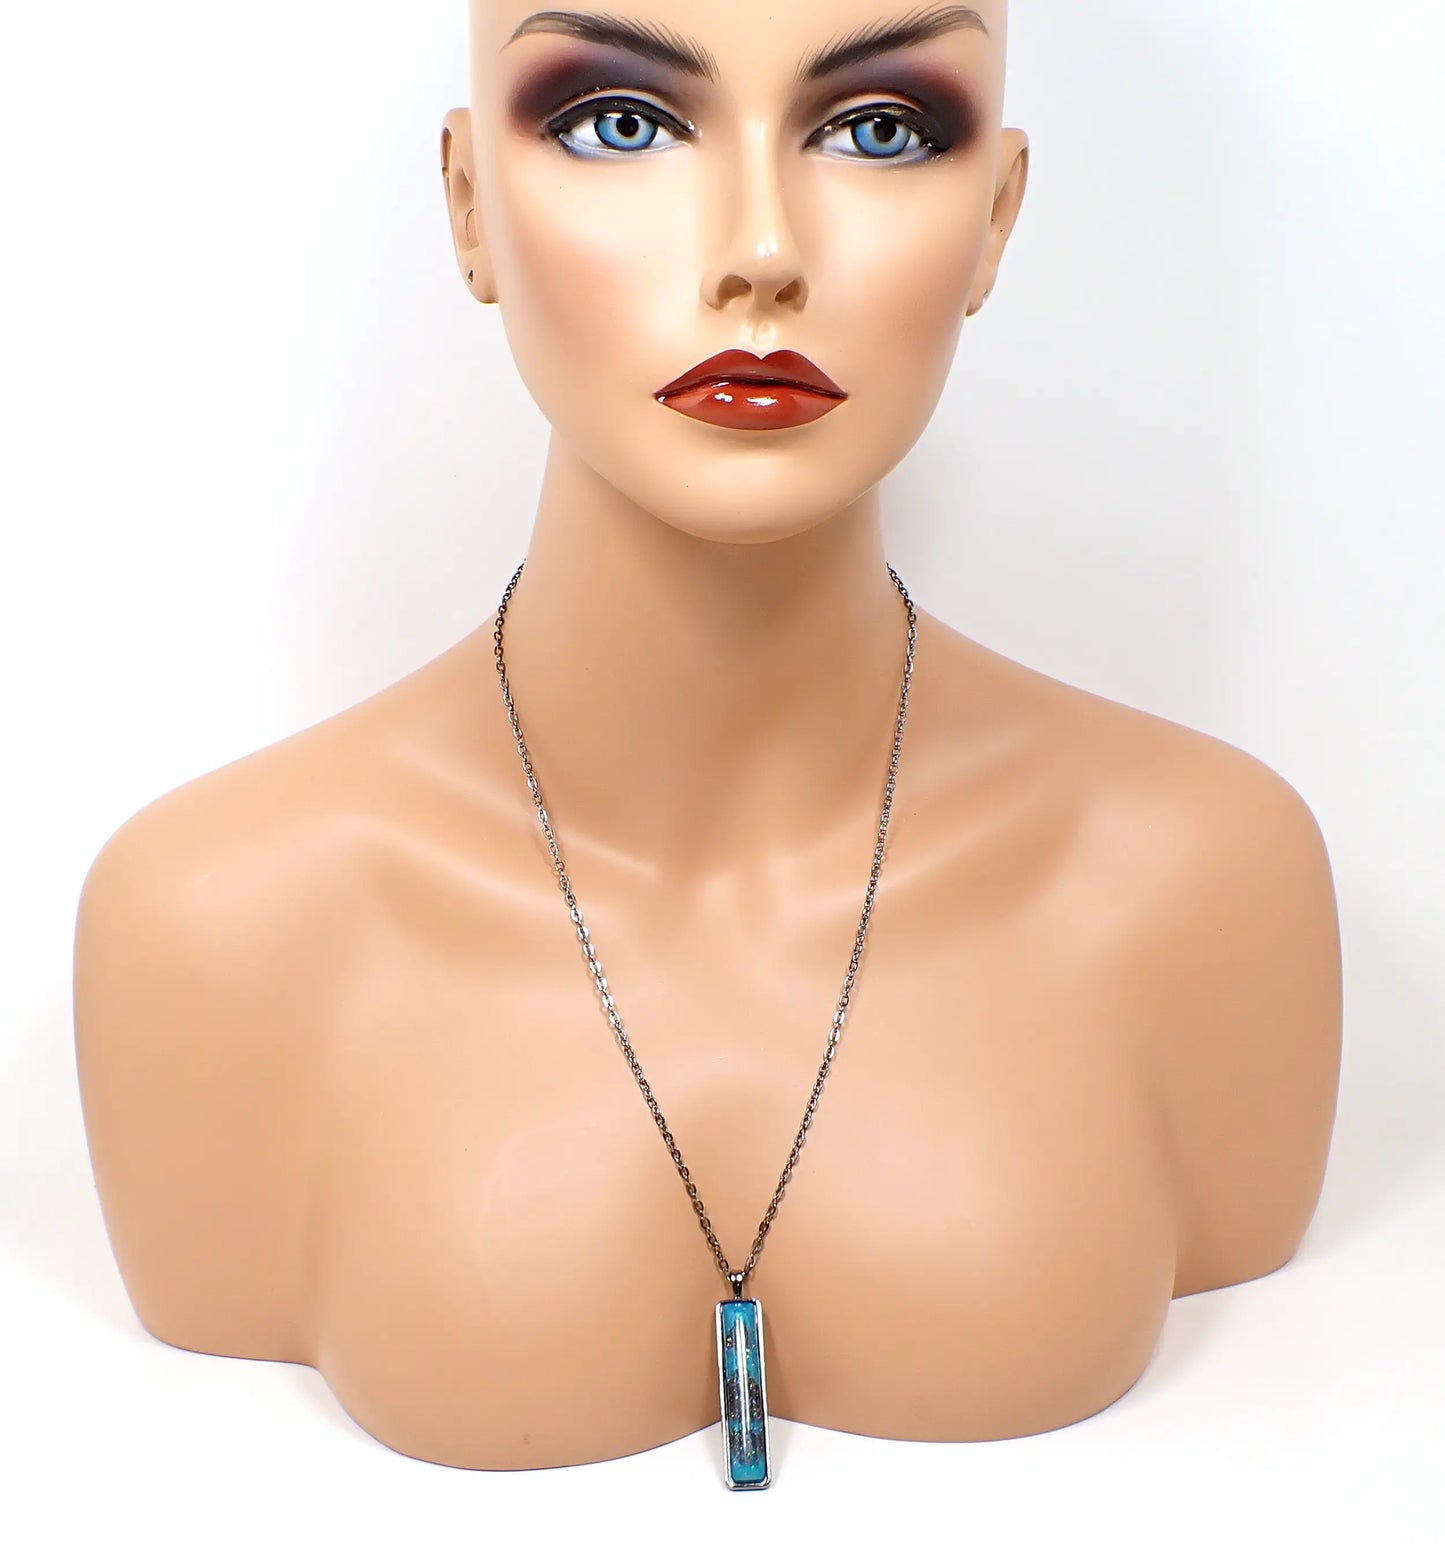 Handmade Teal Blue and Dark Gray Resin Gunmetal Bar Pendant Necklace with Holo Glitter